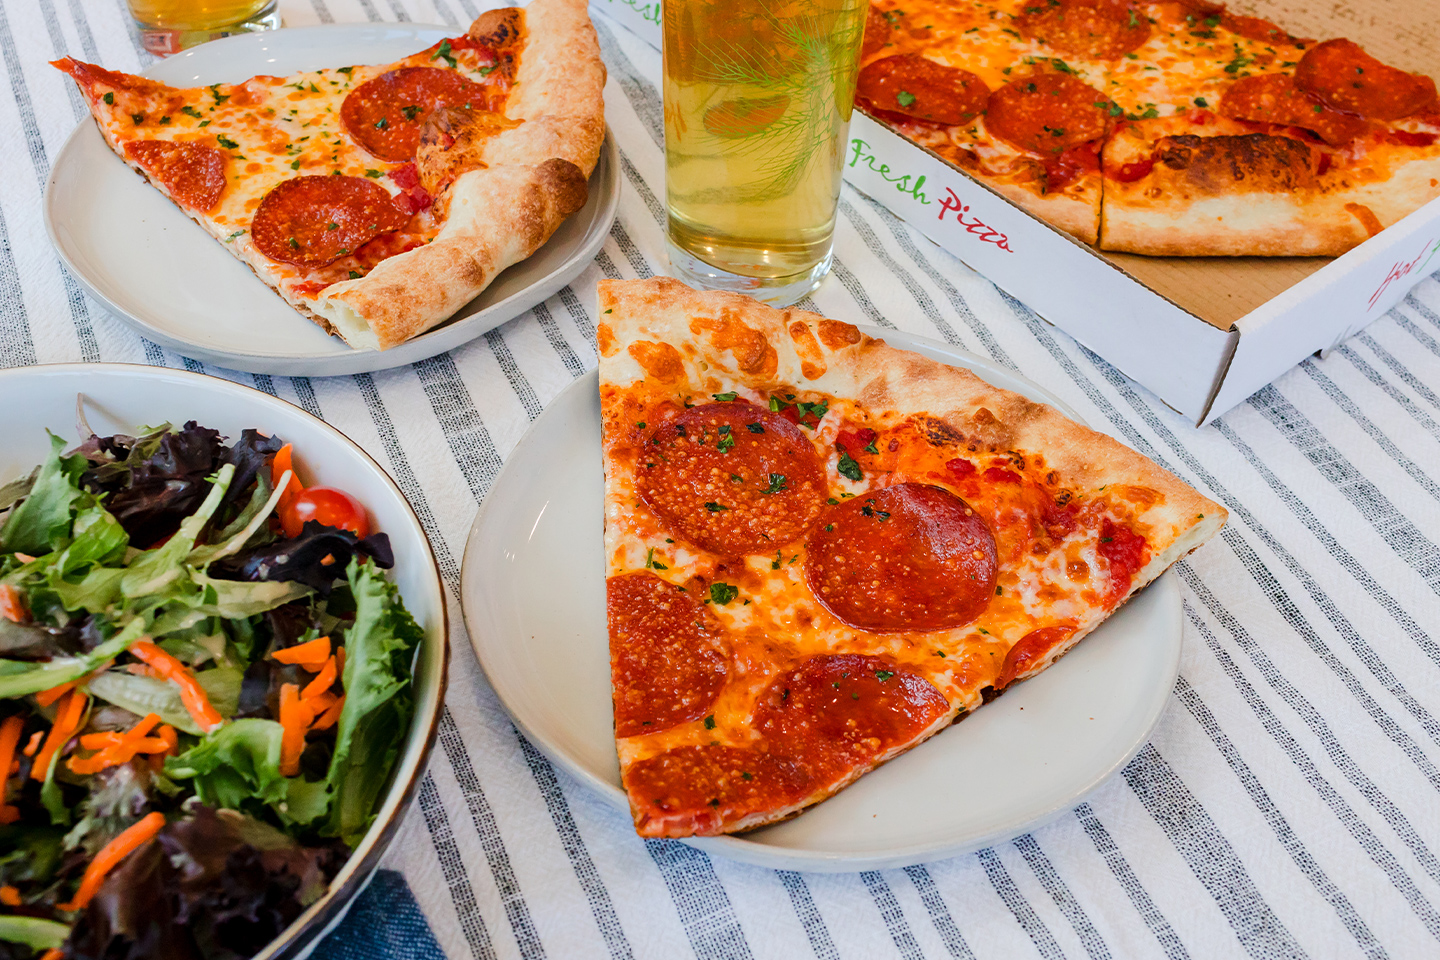 A slice of pepperoni pizza on a plate next to a side salad.